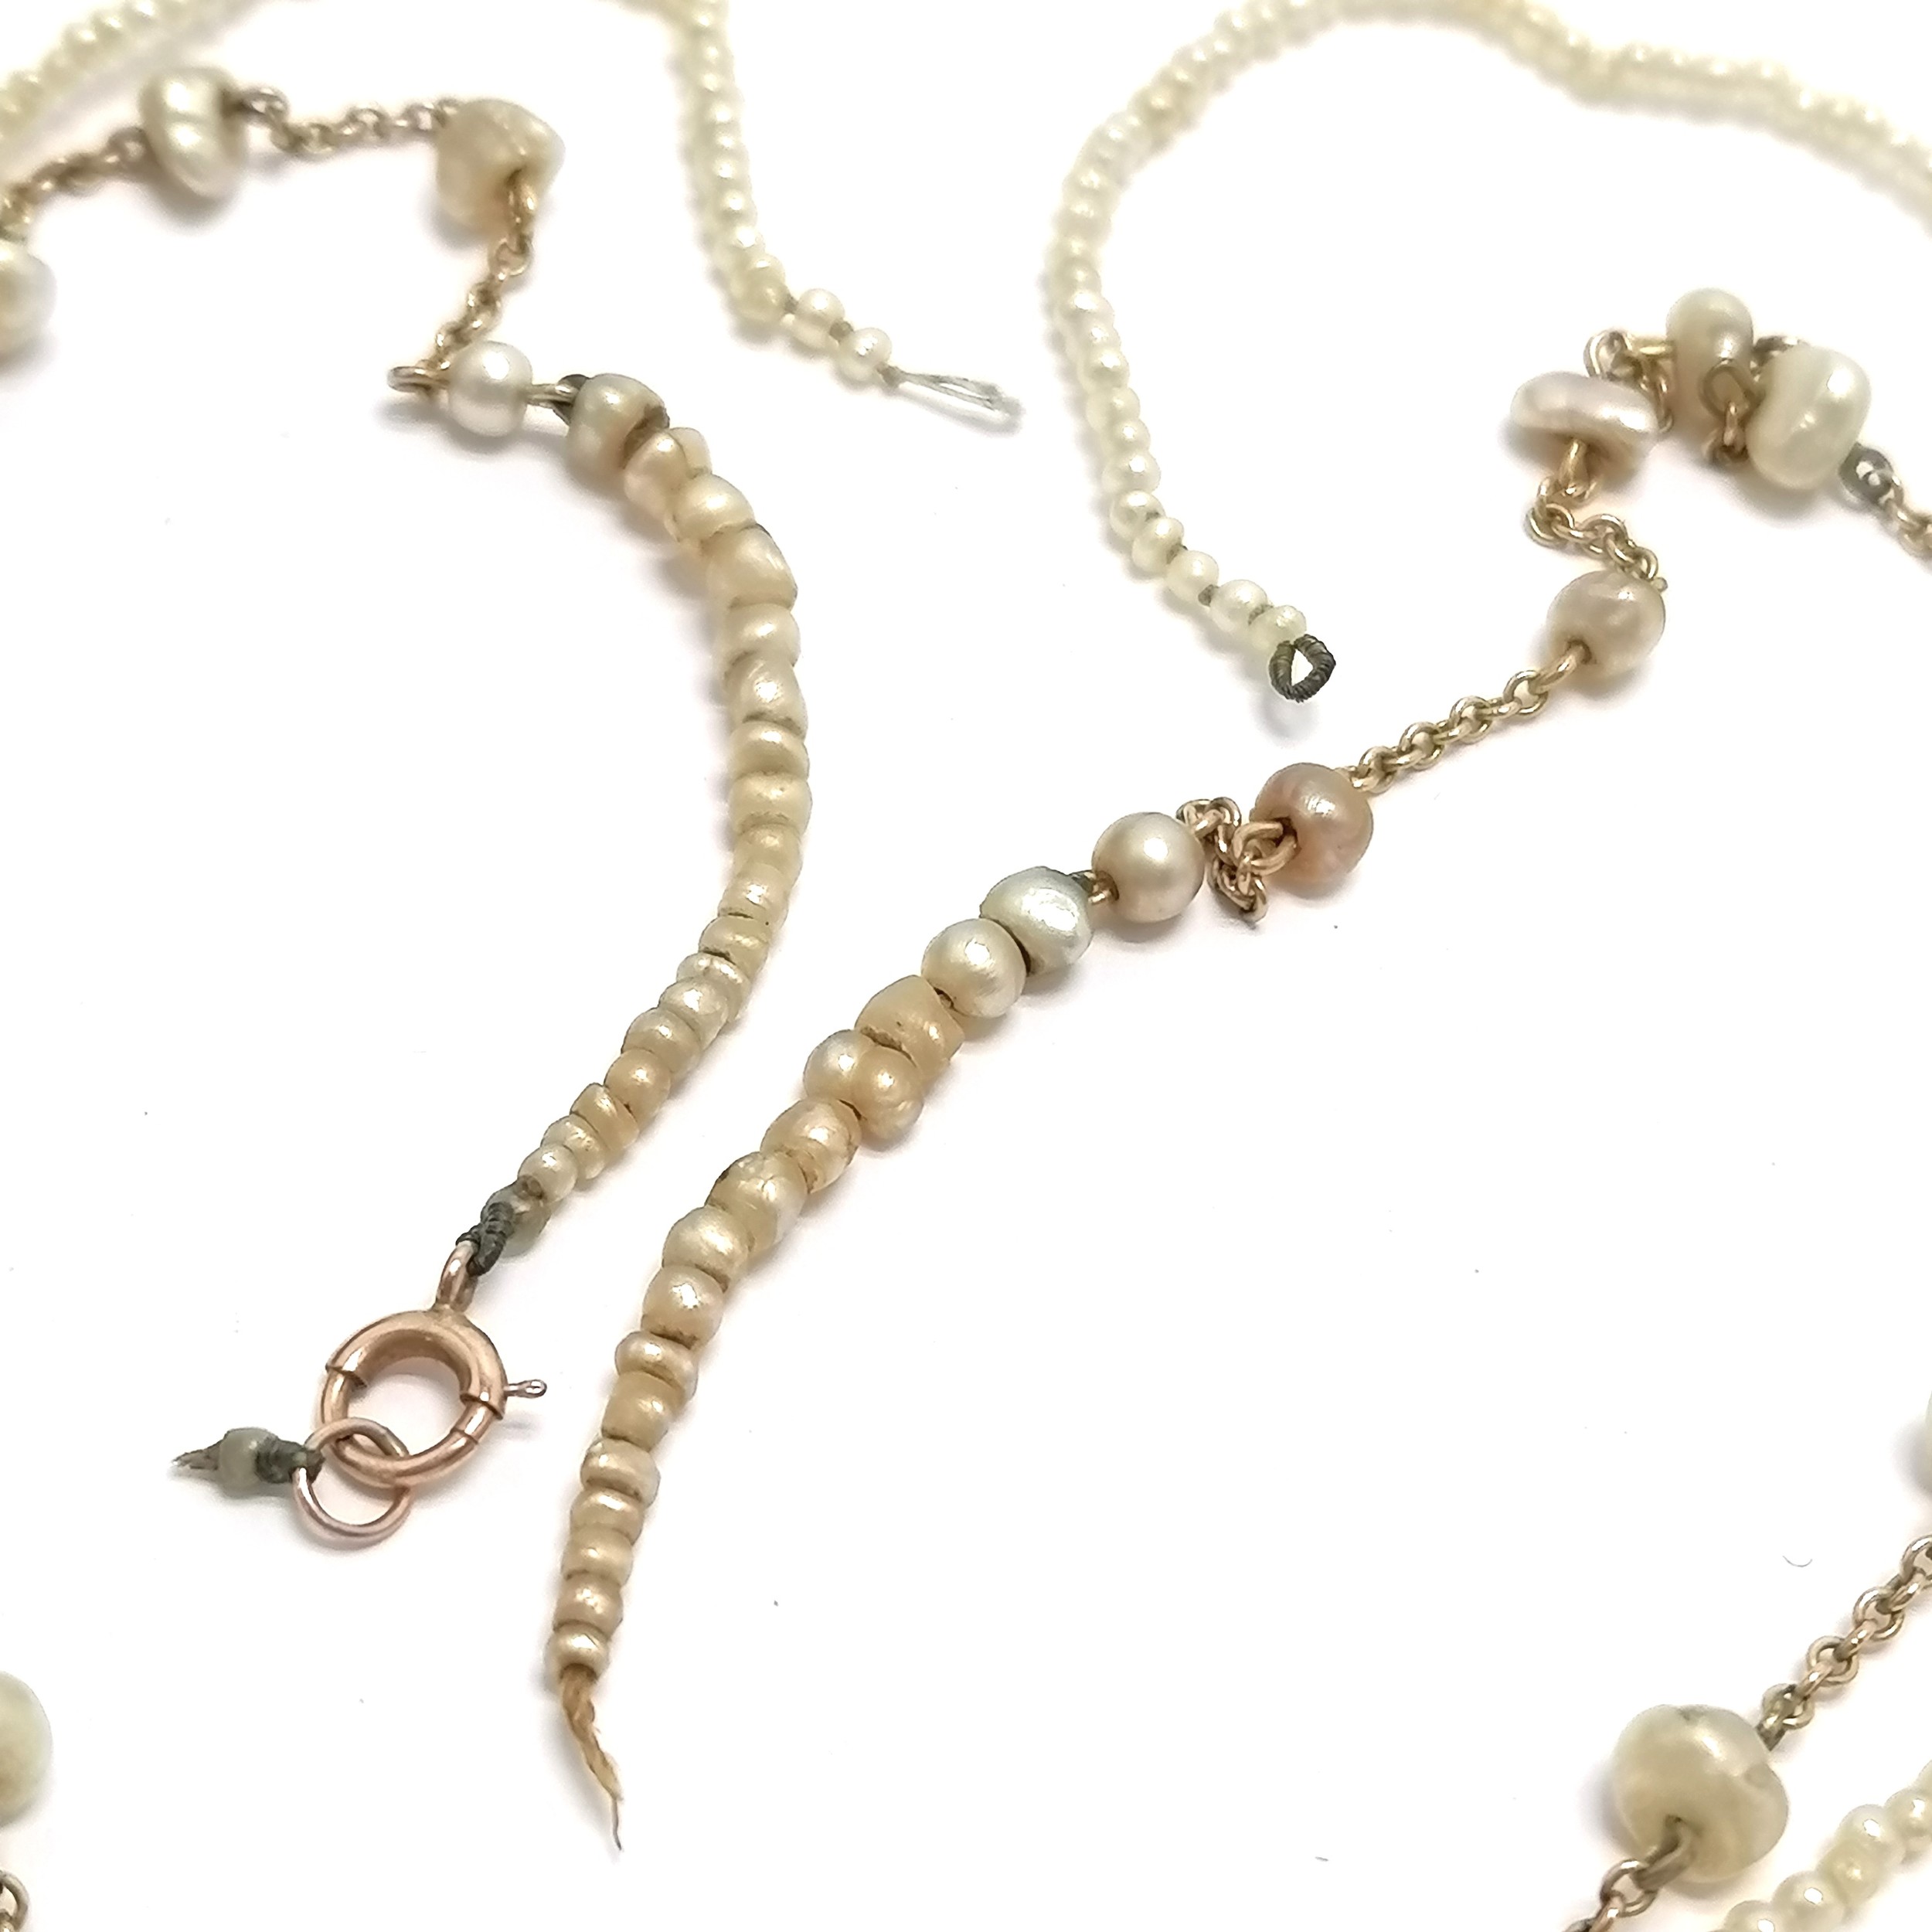 2 x antique natural pearl necklaces - baroque pearl necklace has 9ct gold clasp + chain (42cm) ~ - Image 2 of 2